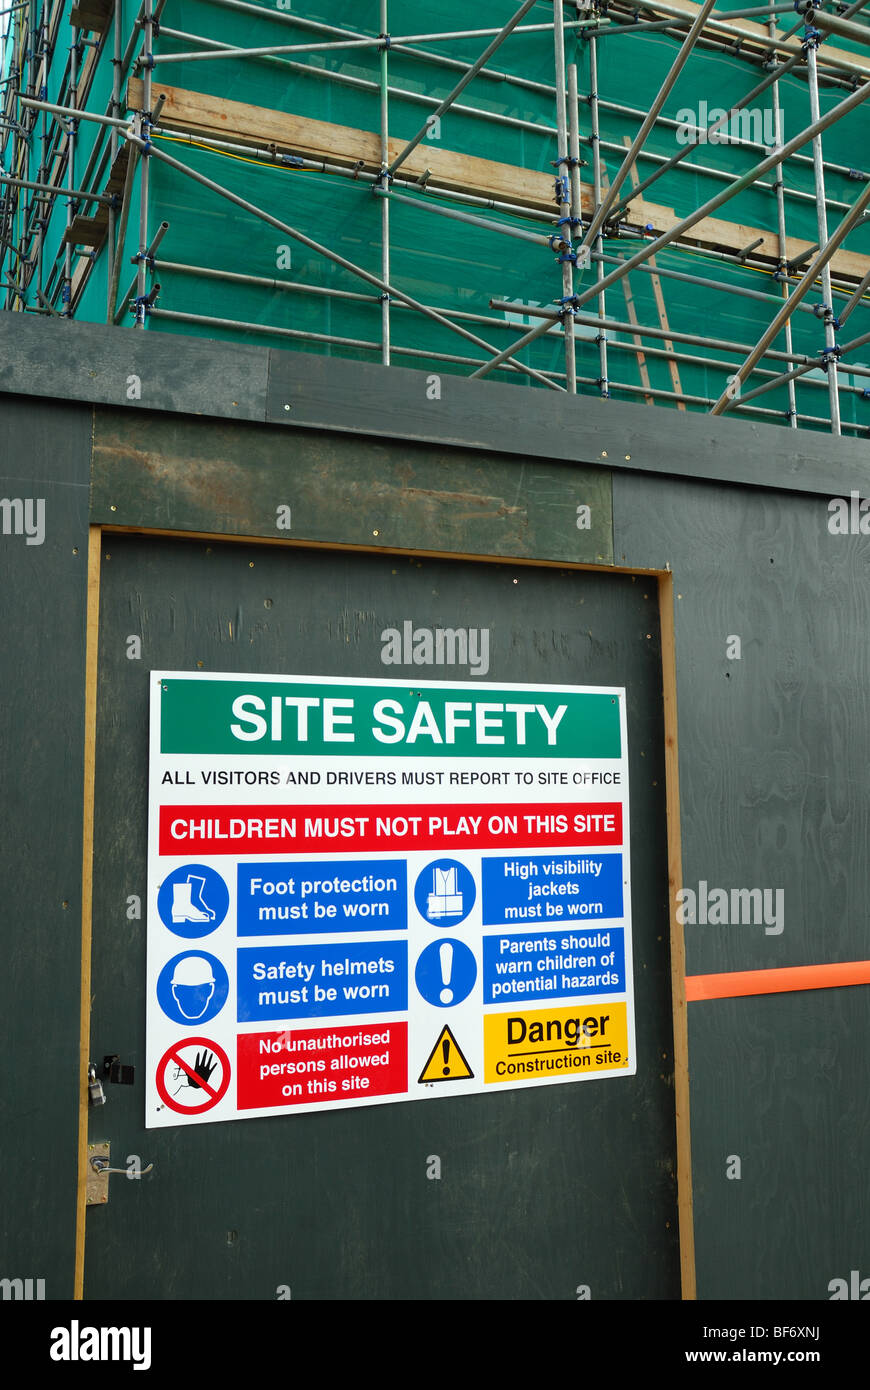 Site safety sign Stock Photo